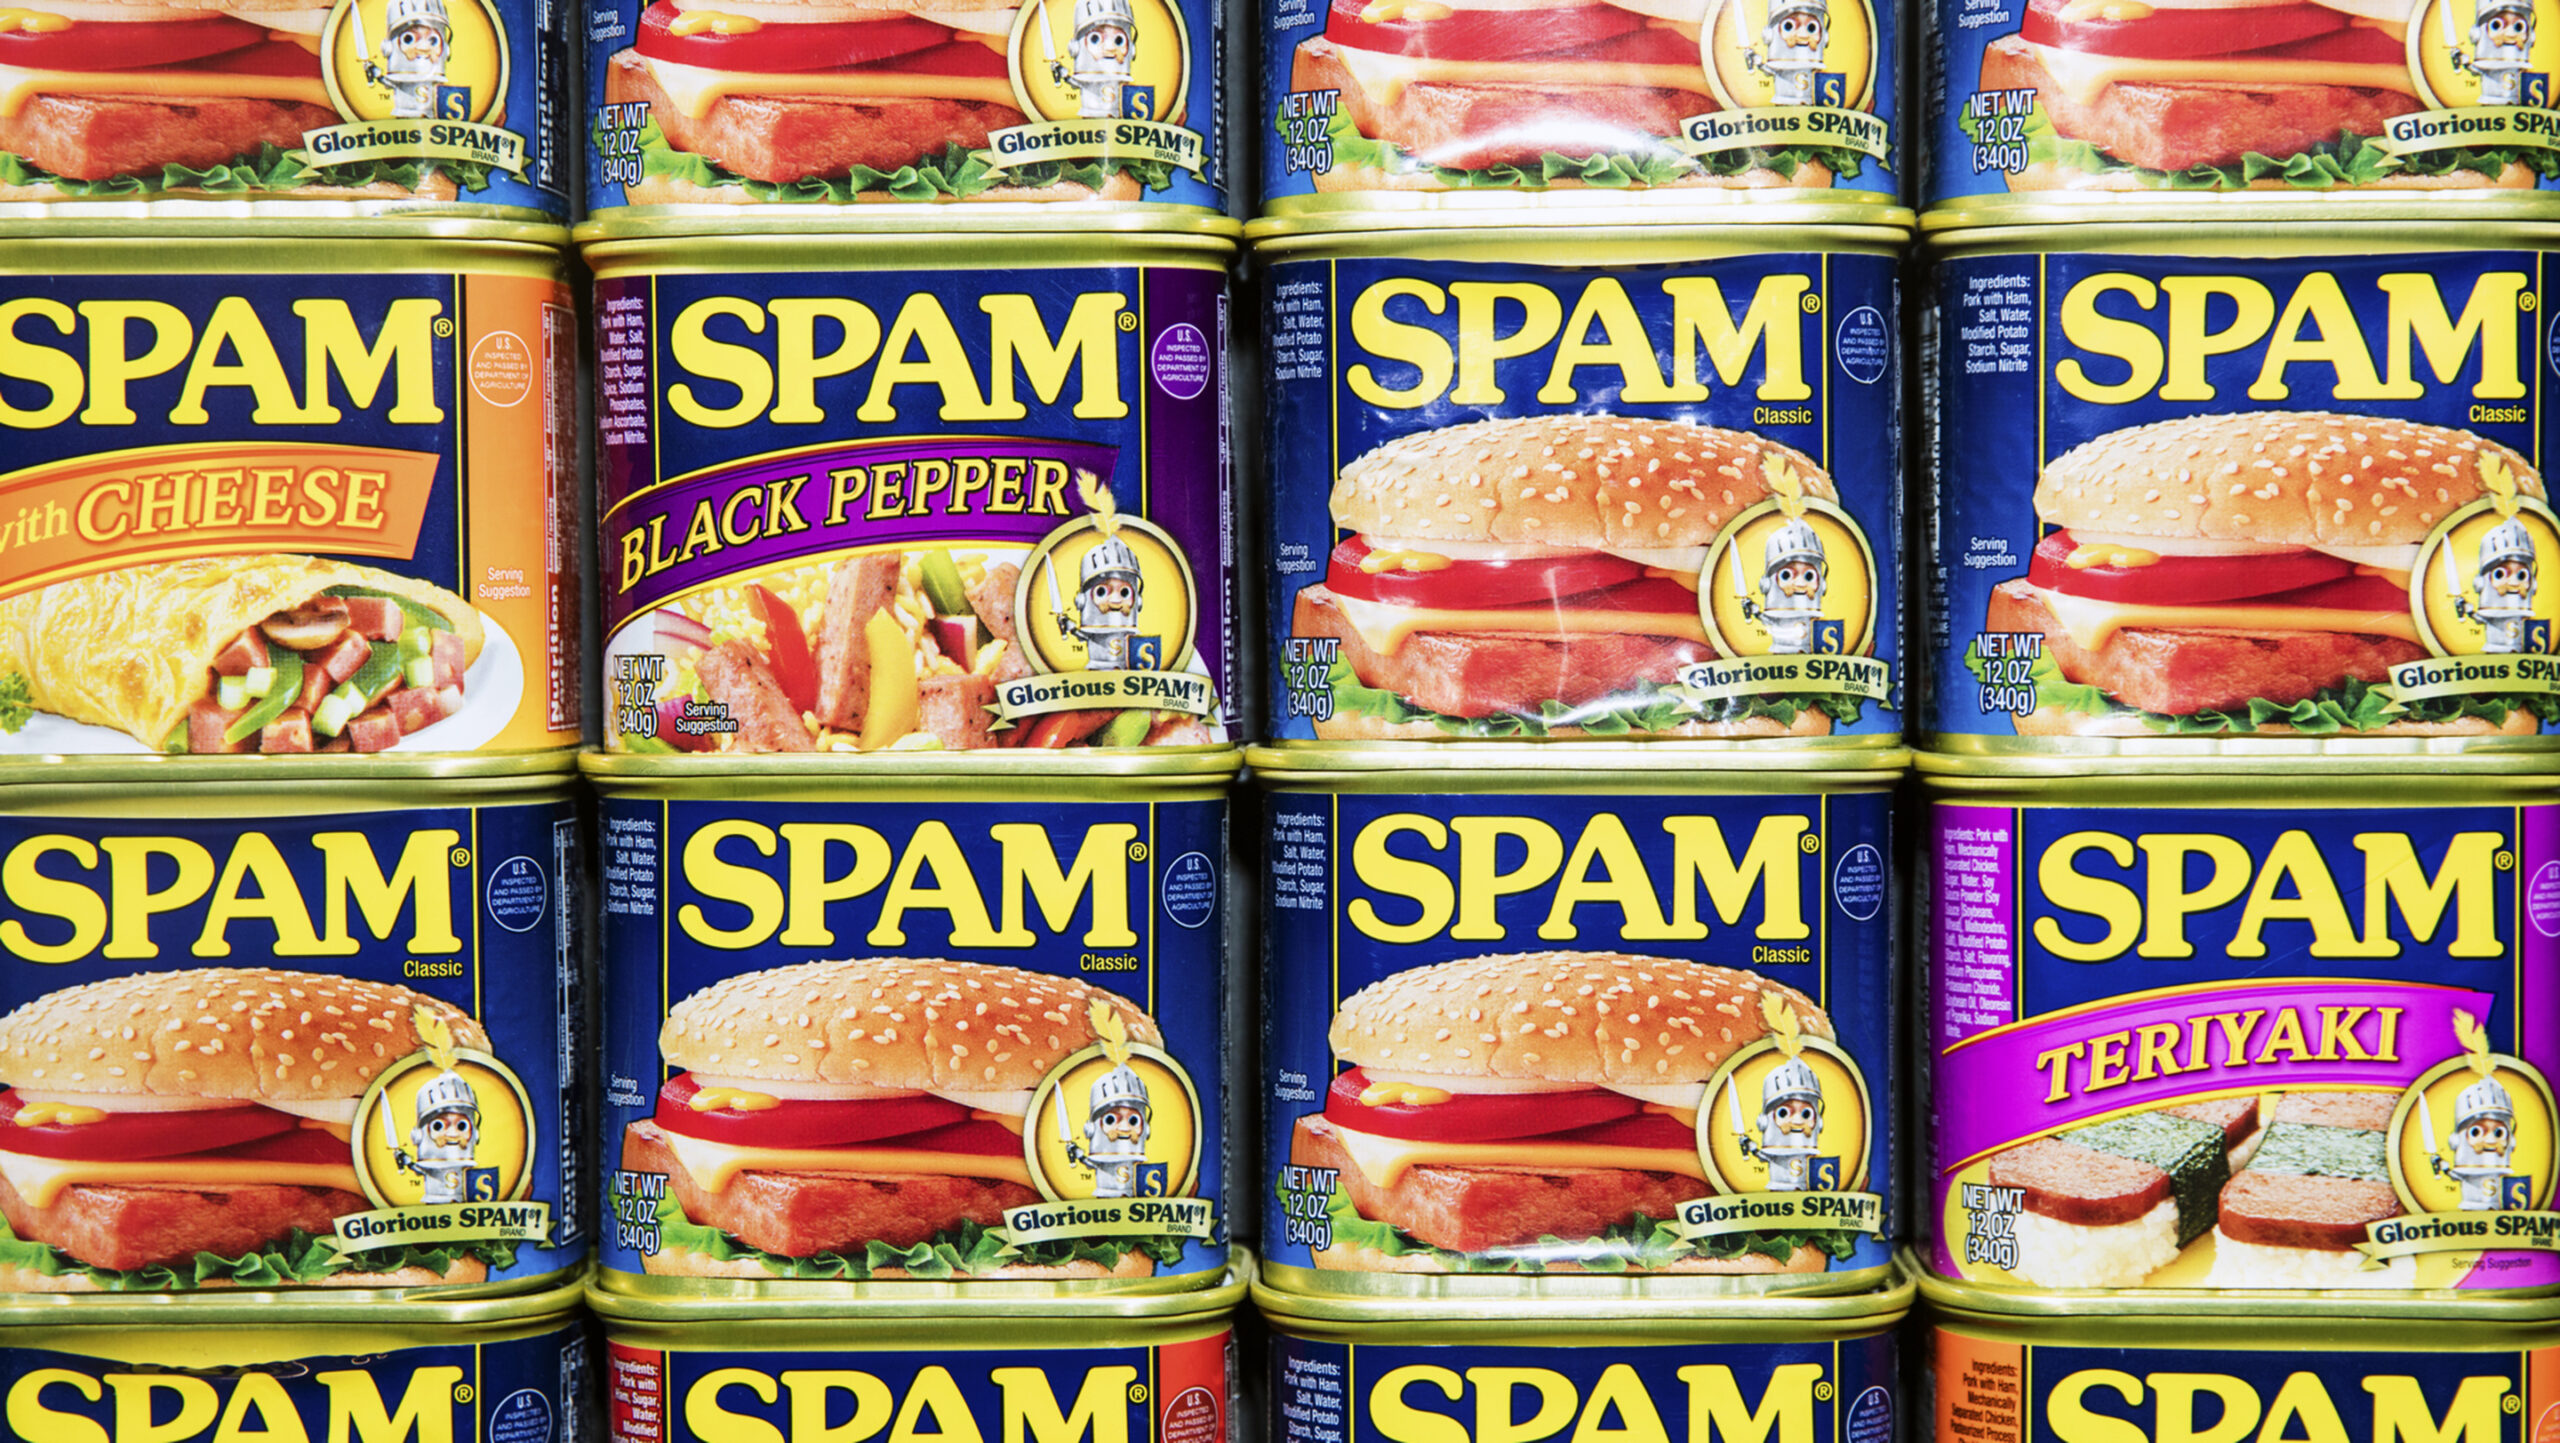 A Quick Ode to Spam